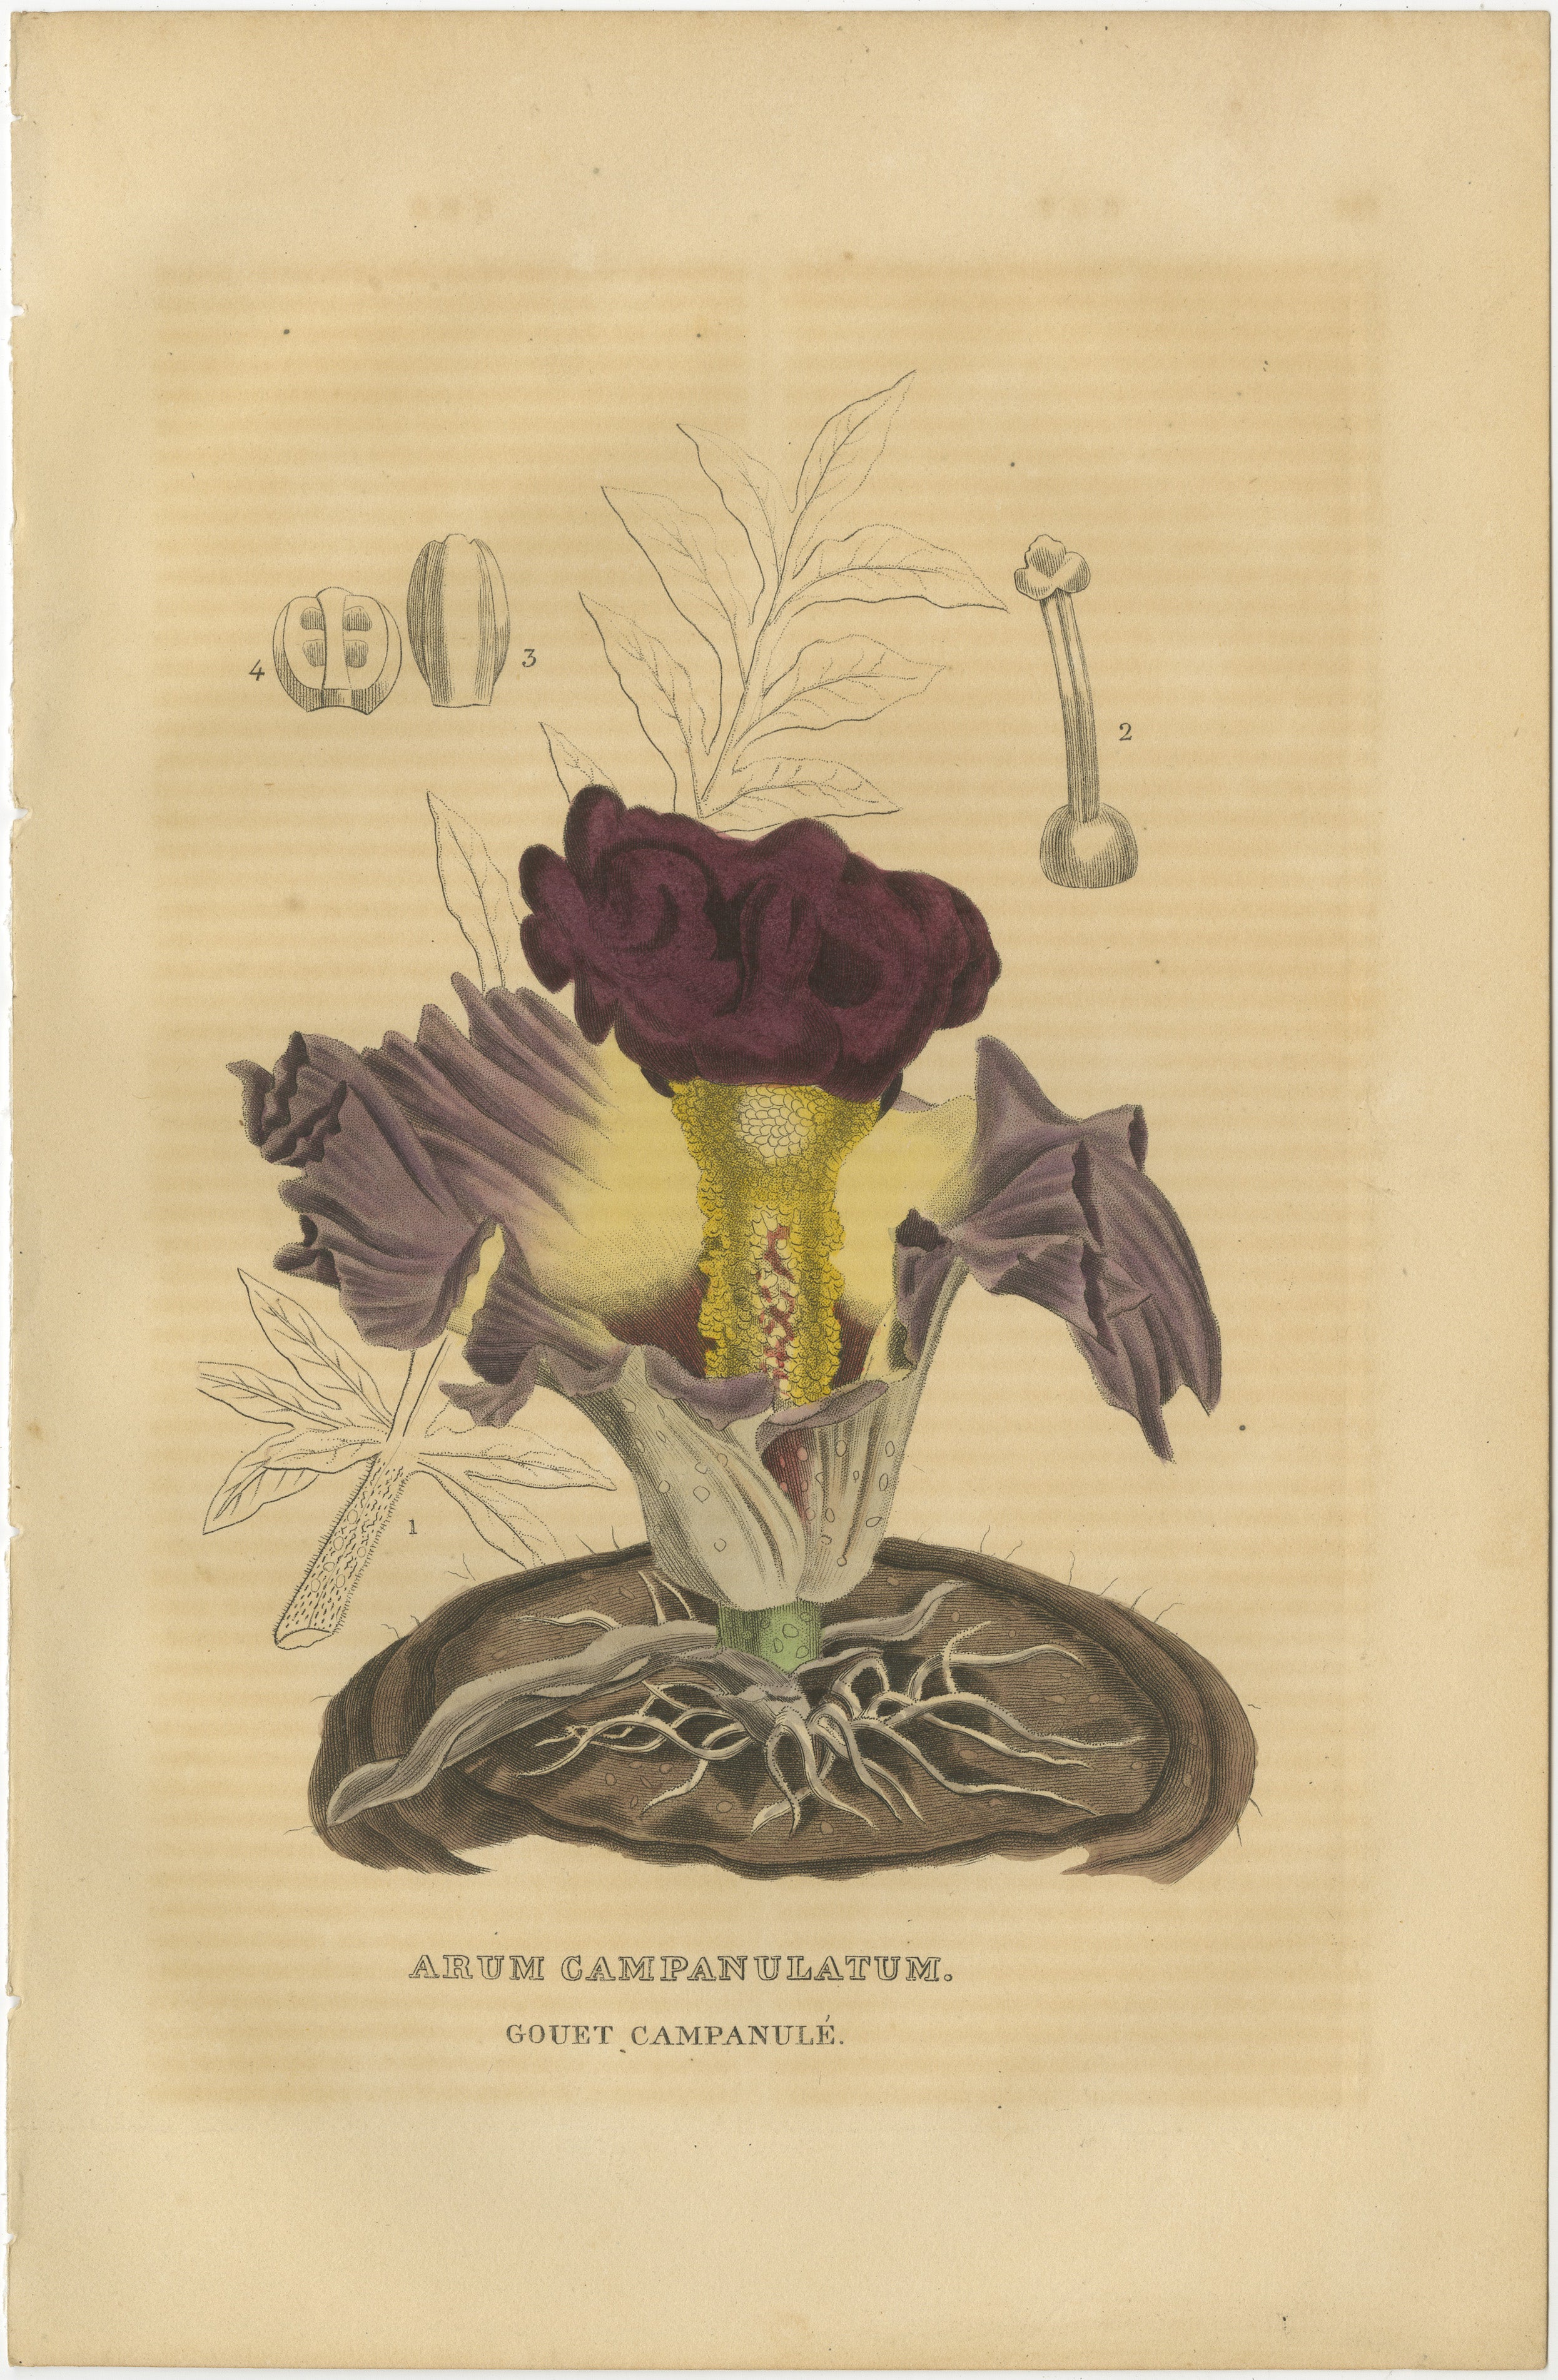 This original antique engraving depicts the Arum Campanulatum, also known as the bell-shaped arum or campanulate arum. This print is hand-colored over 200 years ago.

The plant is illustrated with a large, richly colored burgundy flower that